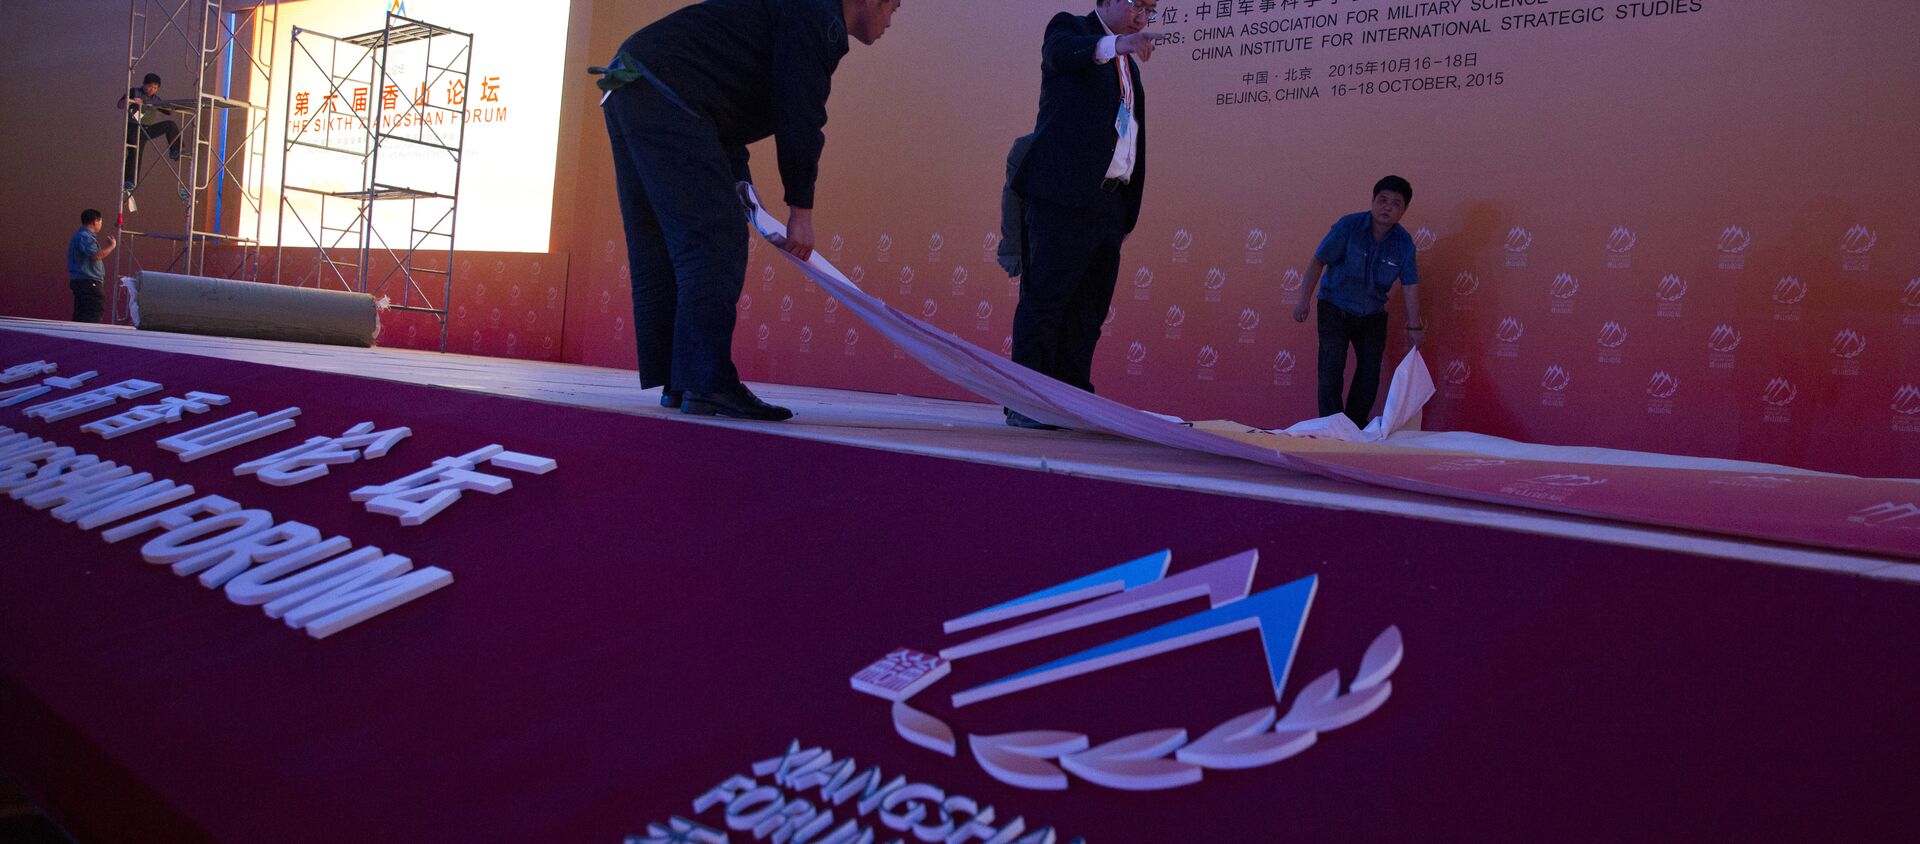 Workers set up the stage before the welcome banquet of the 6th Xiangshan Forum at which analysts, military leaders and others from around the globe will discuss Asian-Pacific security, maritime issues and anti-terrorism in Beijing, Friday, Oct. 16, 2015. - Sputnik International, 1920, 11.10.2016